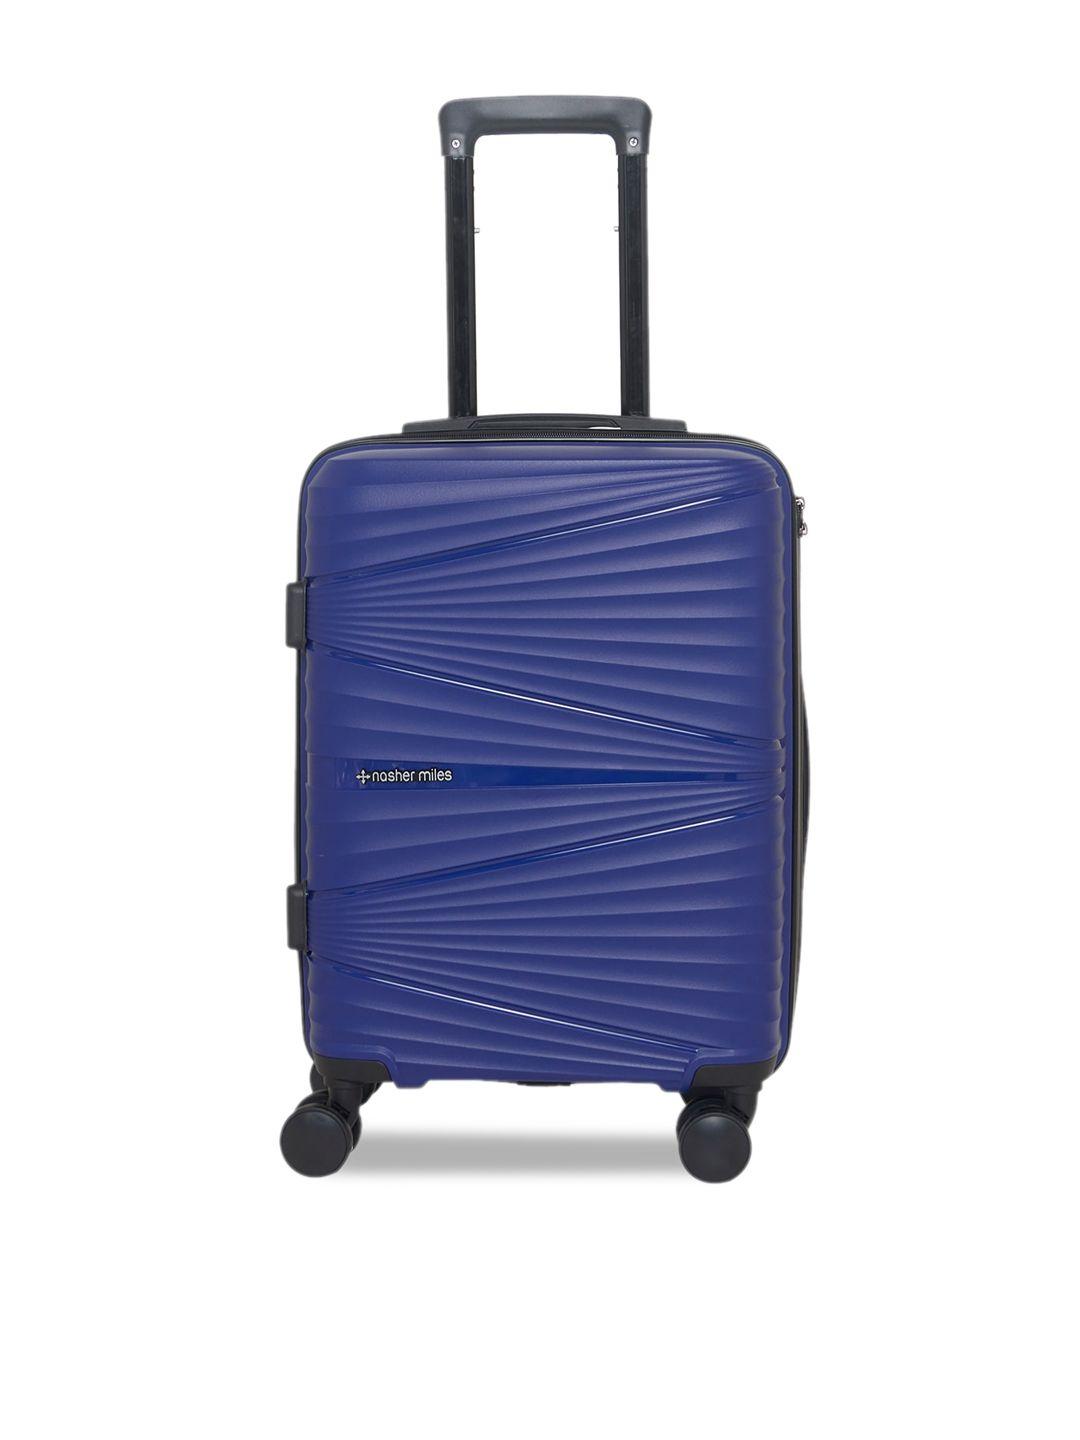 nasher miles navy blue textured hard-sided cabin trolley bag